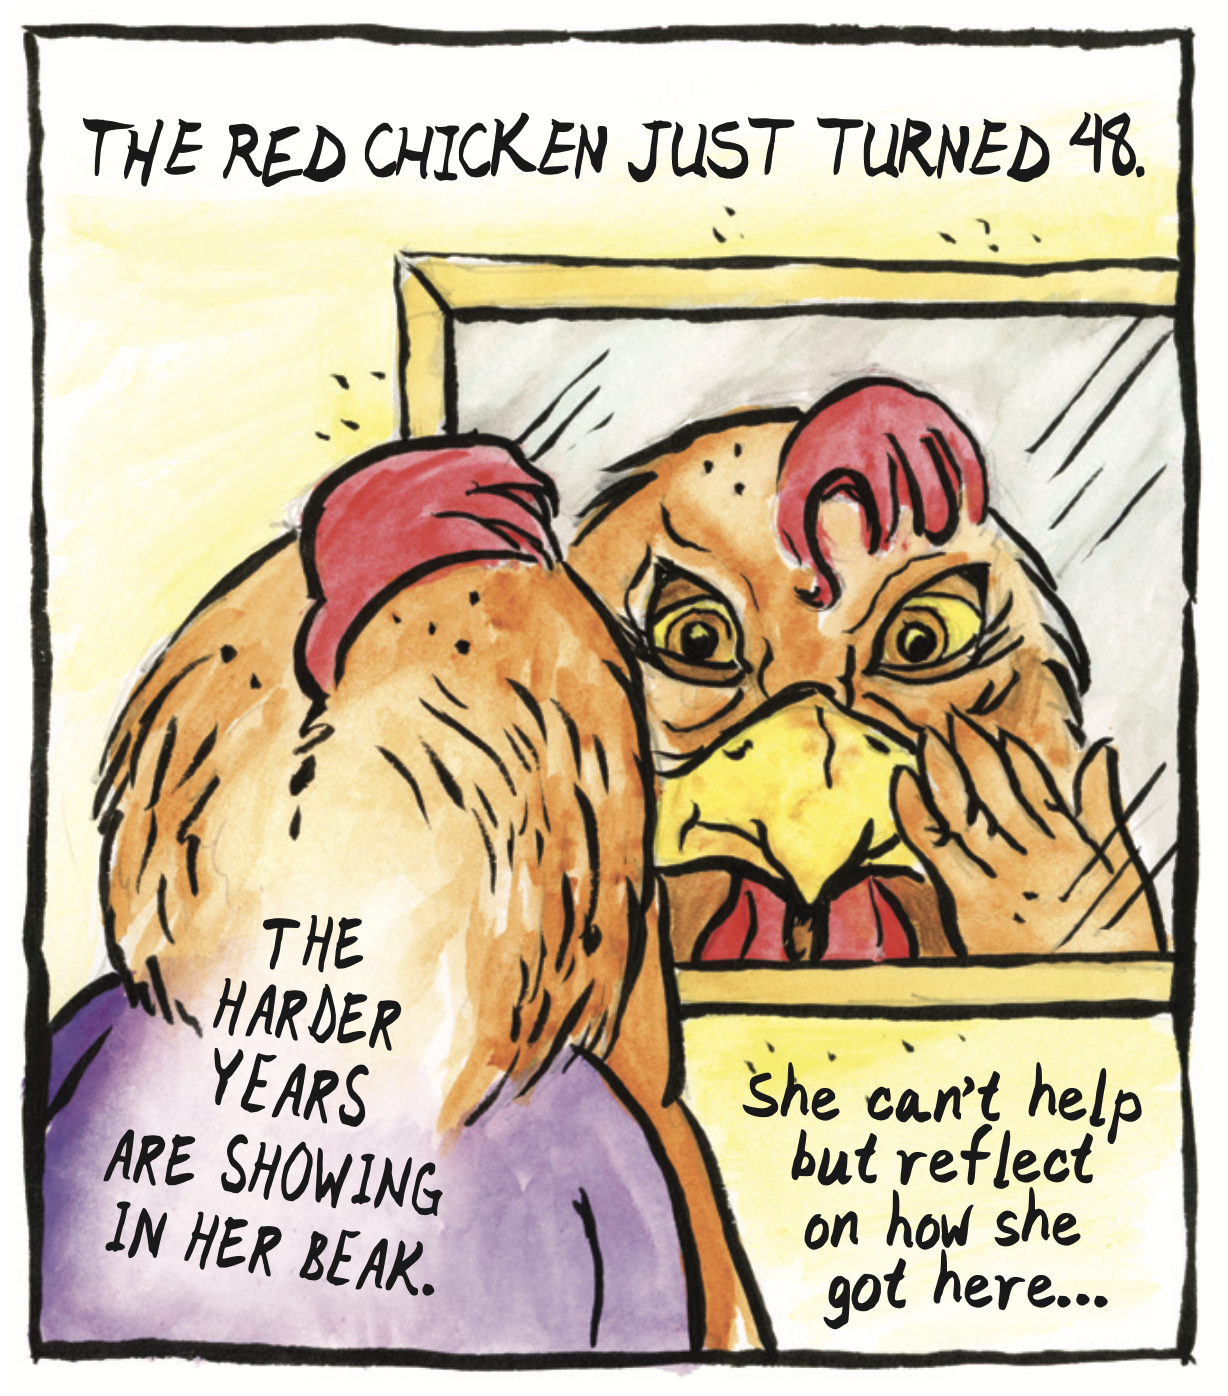 â€œThe red chicken just turned 48. The harder years are showing in her beak. She canâ€™t help but reflect on how she got hereâ€¦â€ An anthropomorphic red chicken is looking at her reflection in the mirror, touching her eyebags with dismay.